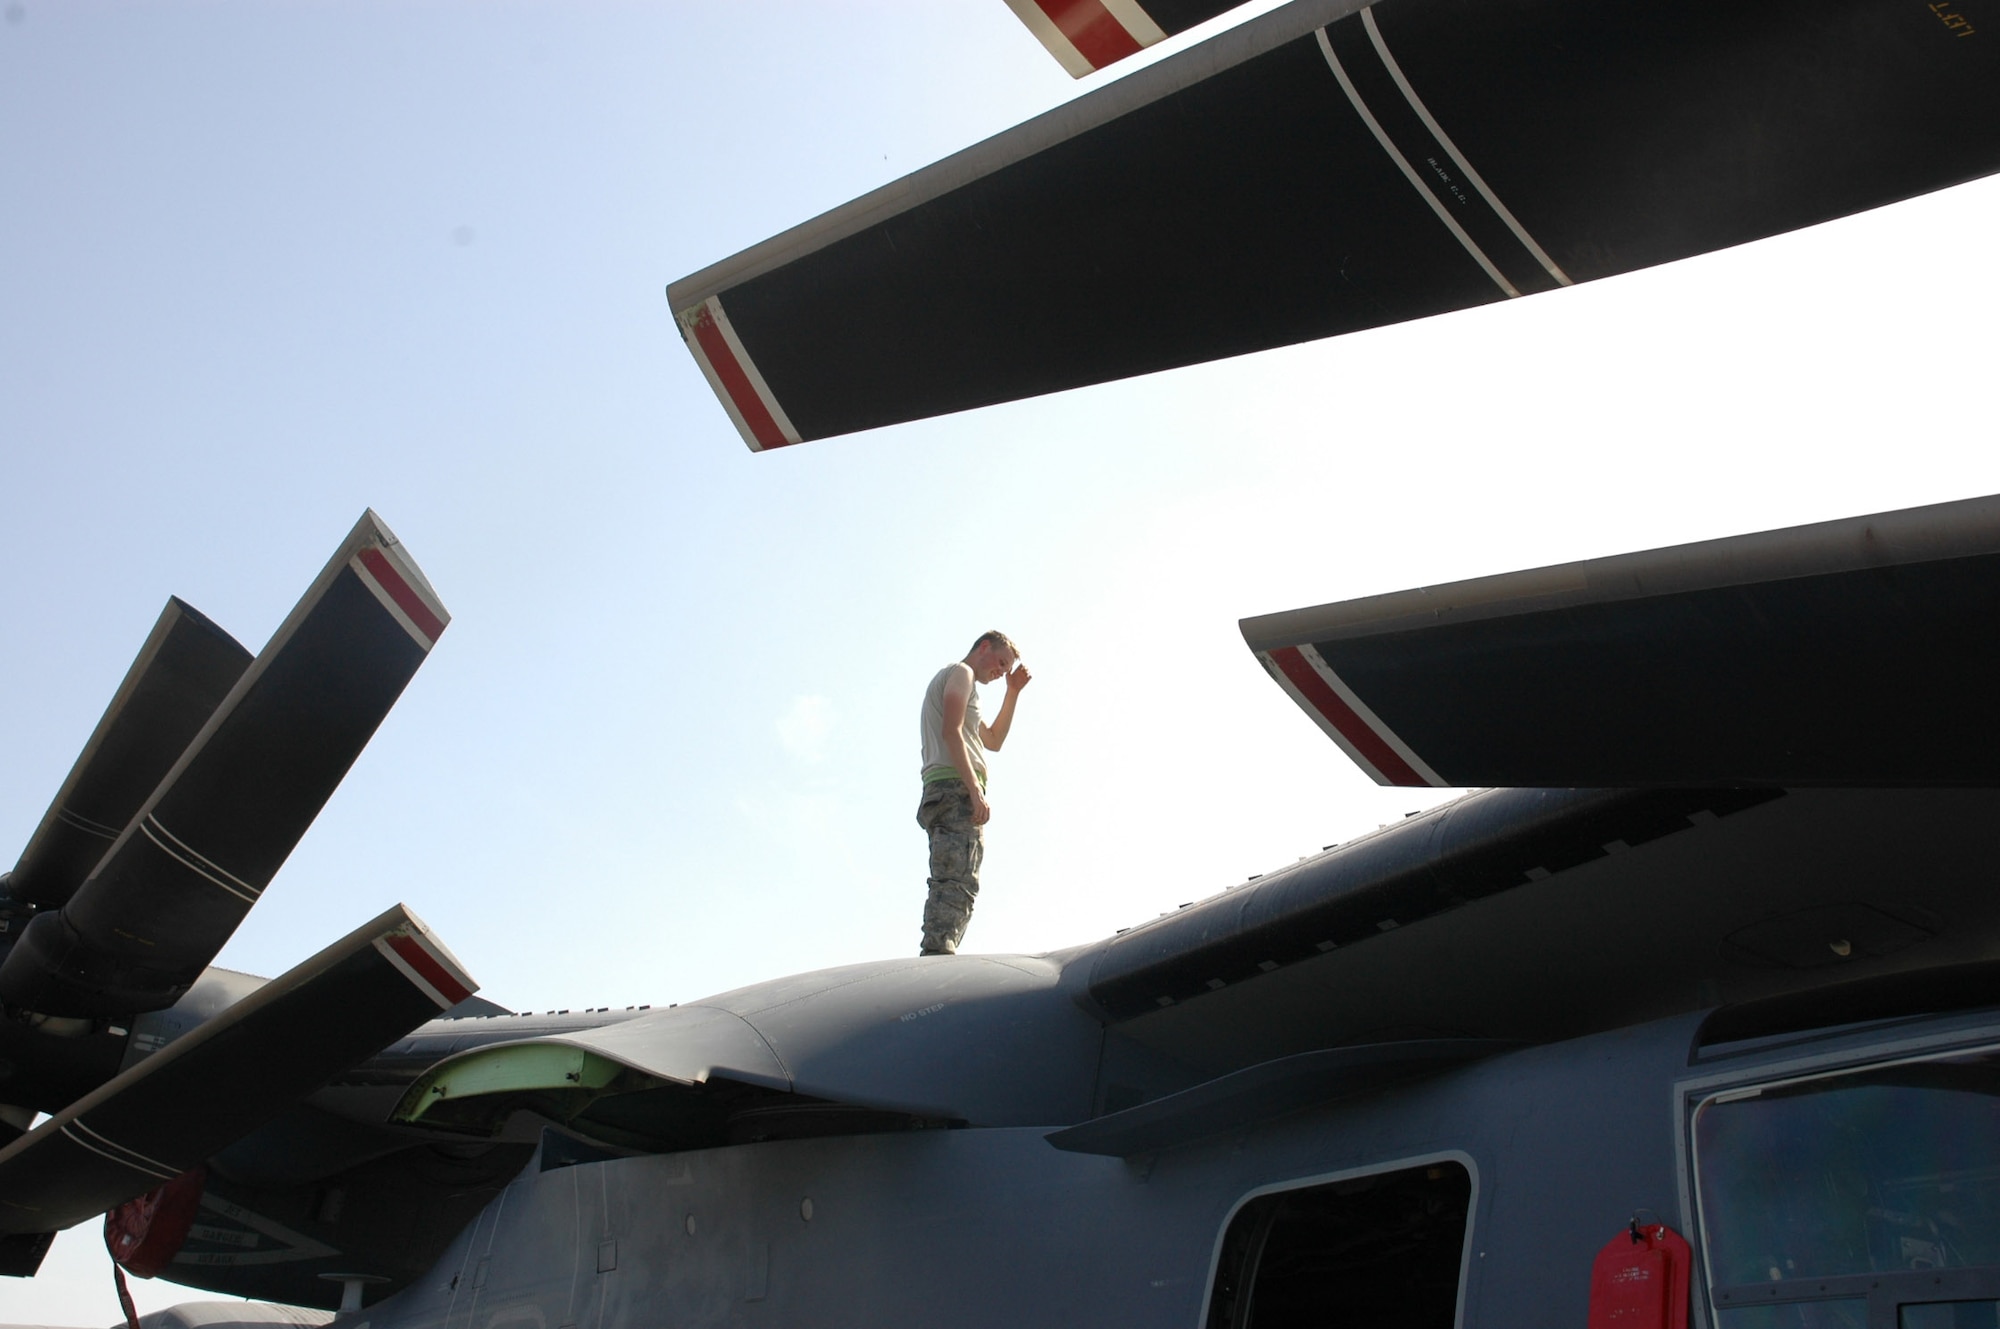 An Airman from the 1st Special Operations Helicopter Maintenance Squadron works atop a CV-22 Osprey under the African sun in Bamako, Mali. The CV-22s conducted their first operational deployment as part of Exercise Flintlock, a training designed build capacity among Trans-Saharan nations so that they may more effectively address issues which threaten peace, stability and security. (U.S. Air Force photo/1st Lt. Lauren Johnson) 
